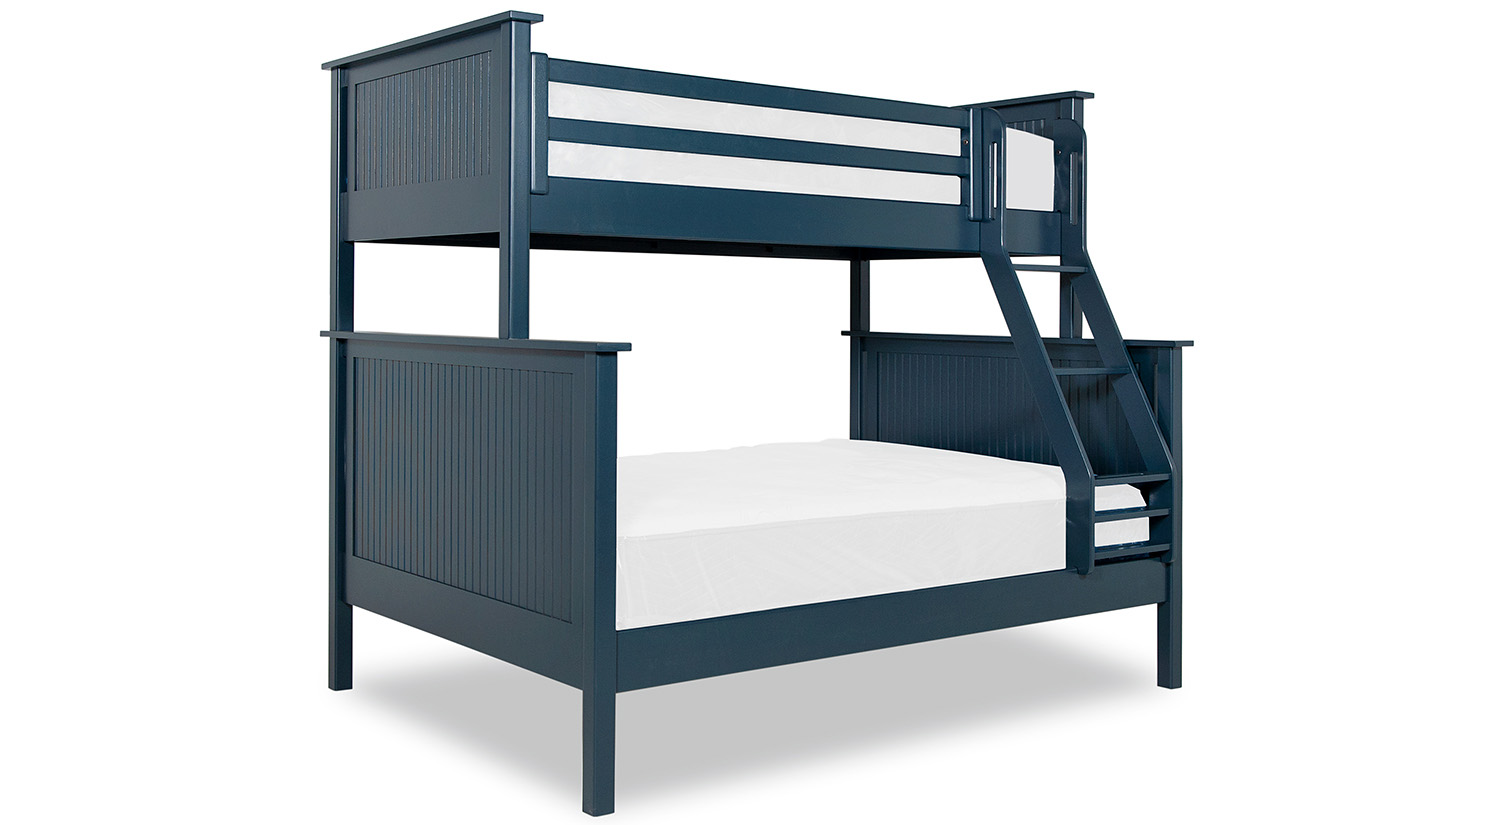 Circle Furniture Revolution Bunk Bed, Navy Bunk Beds Twin Over Full